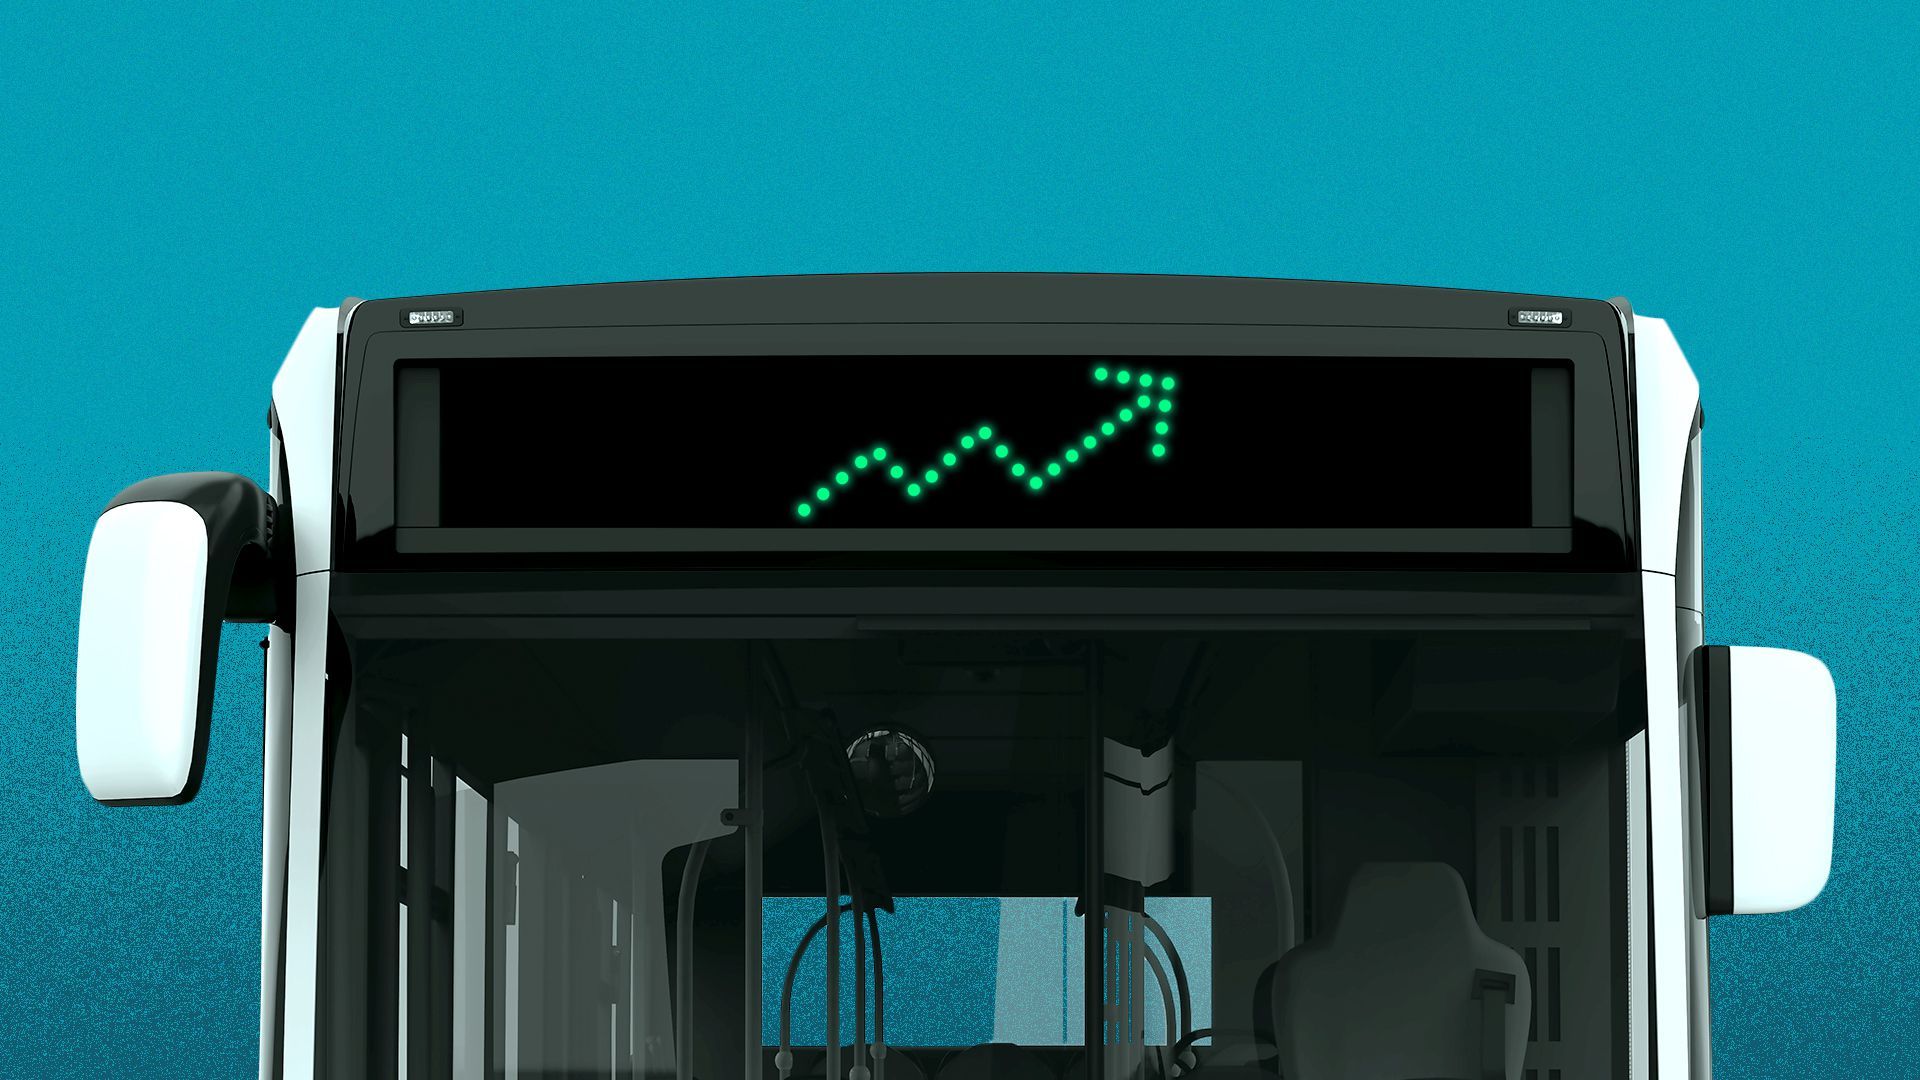 Illustration of a bus that is displaying an upward trend line.